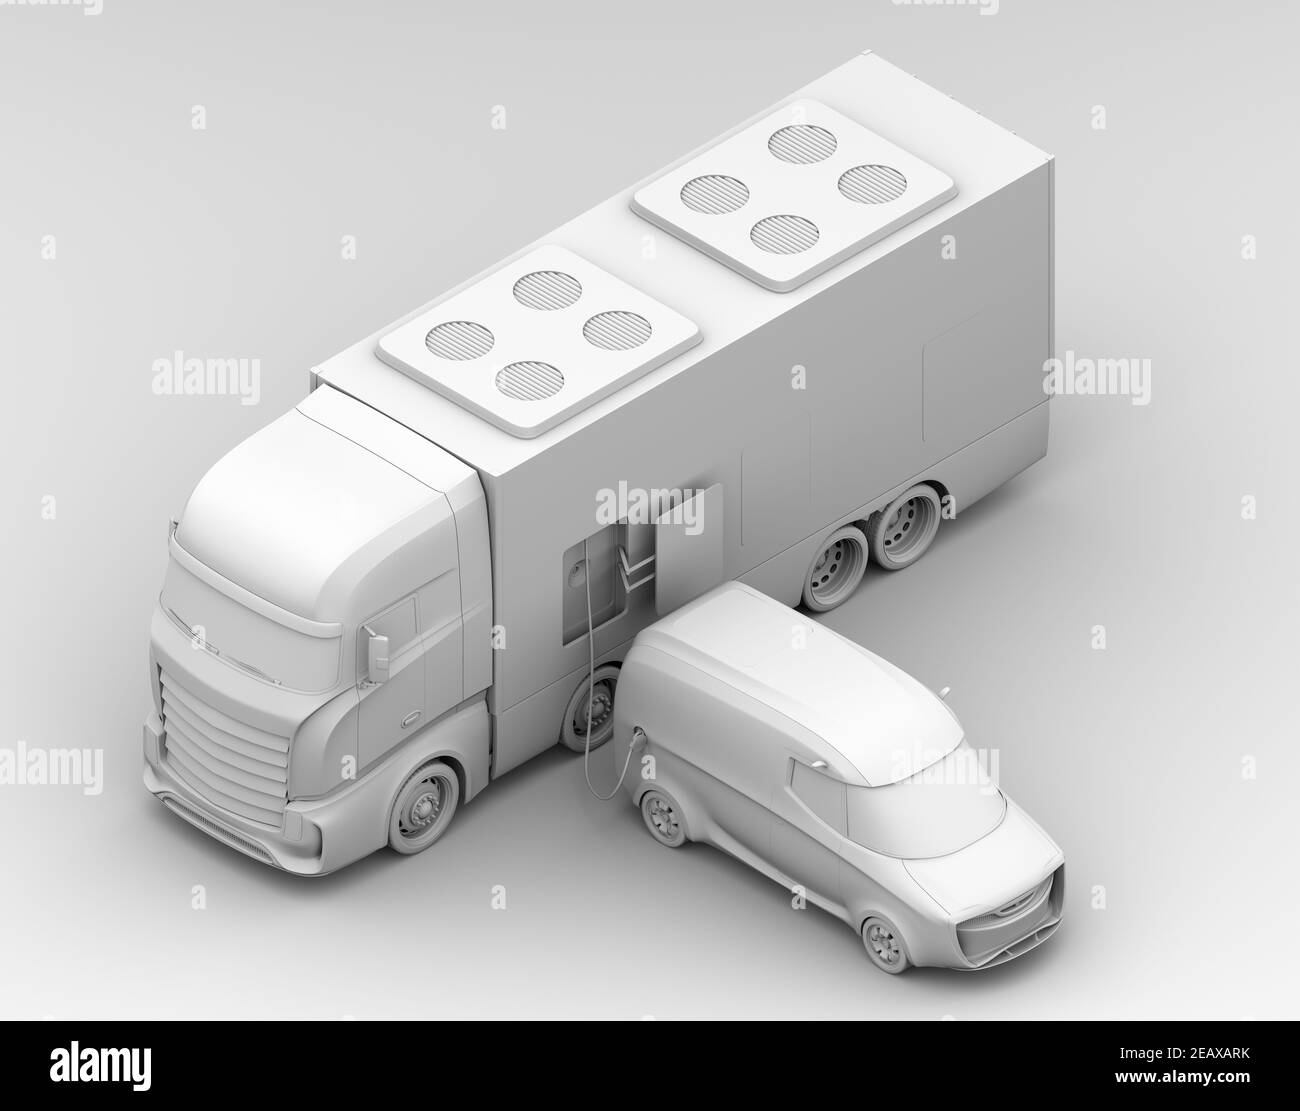 Clay rendering of electric cars charging from a power supply truck. Mobile charging station concept. 3D rendering image. Stock Photo